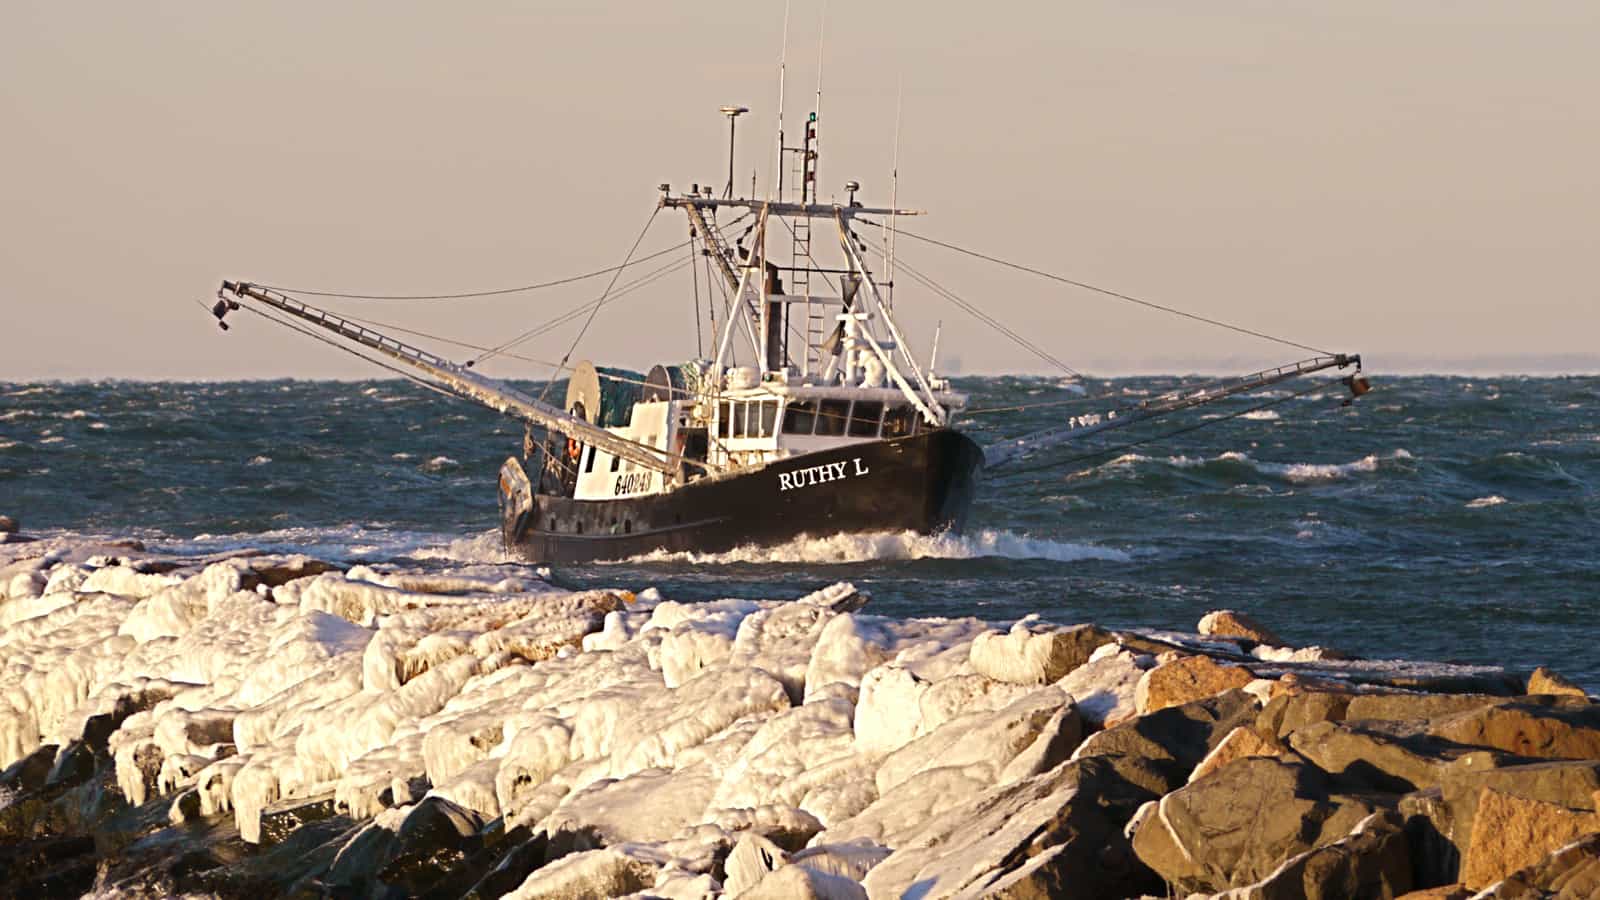 The trawler Ruthy L coming into Montauk Harbor on a bitterly cold January day. Ice on the jetty in the foreground.